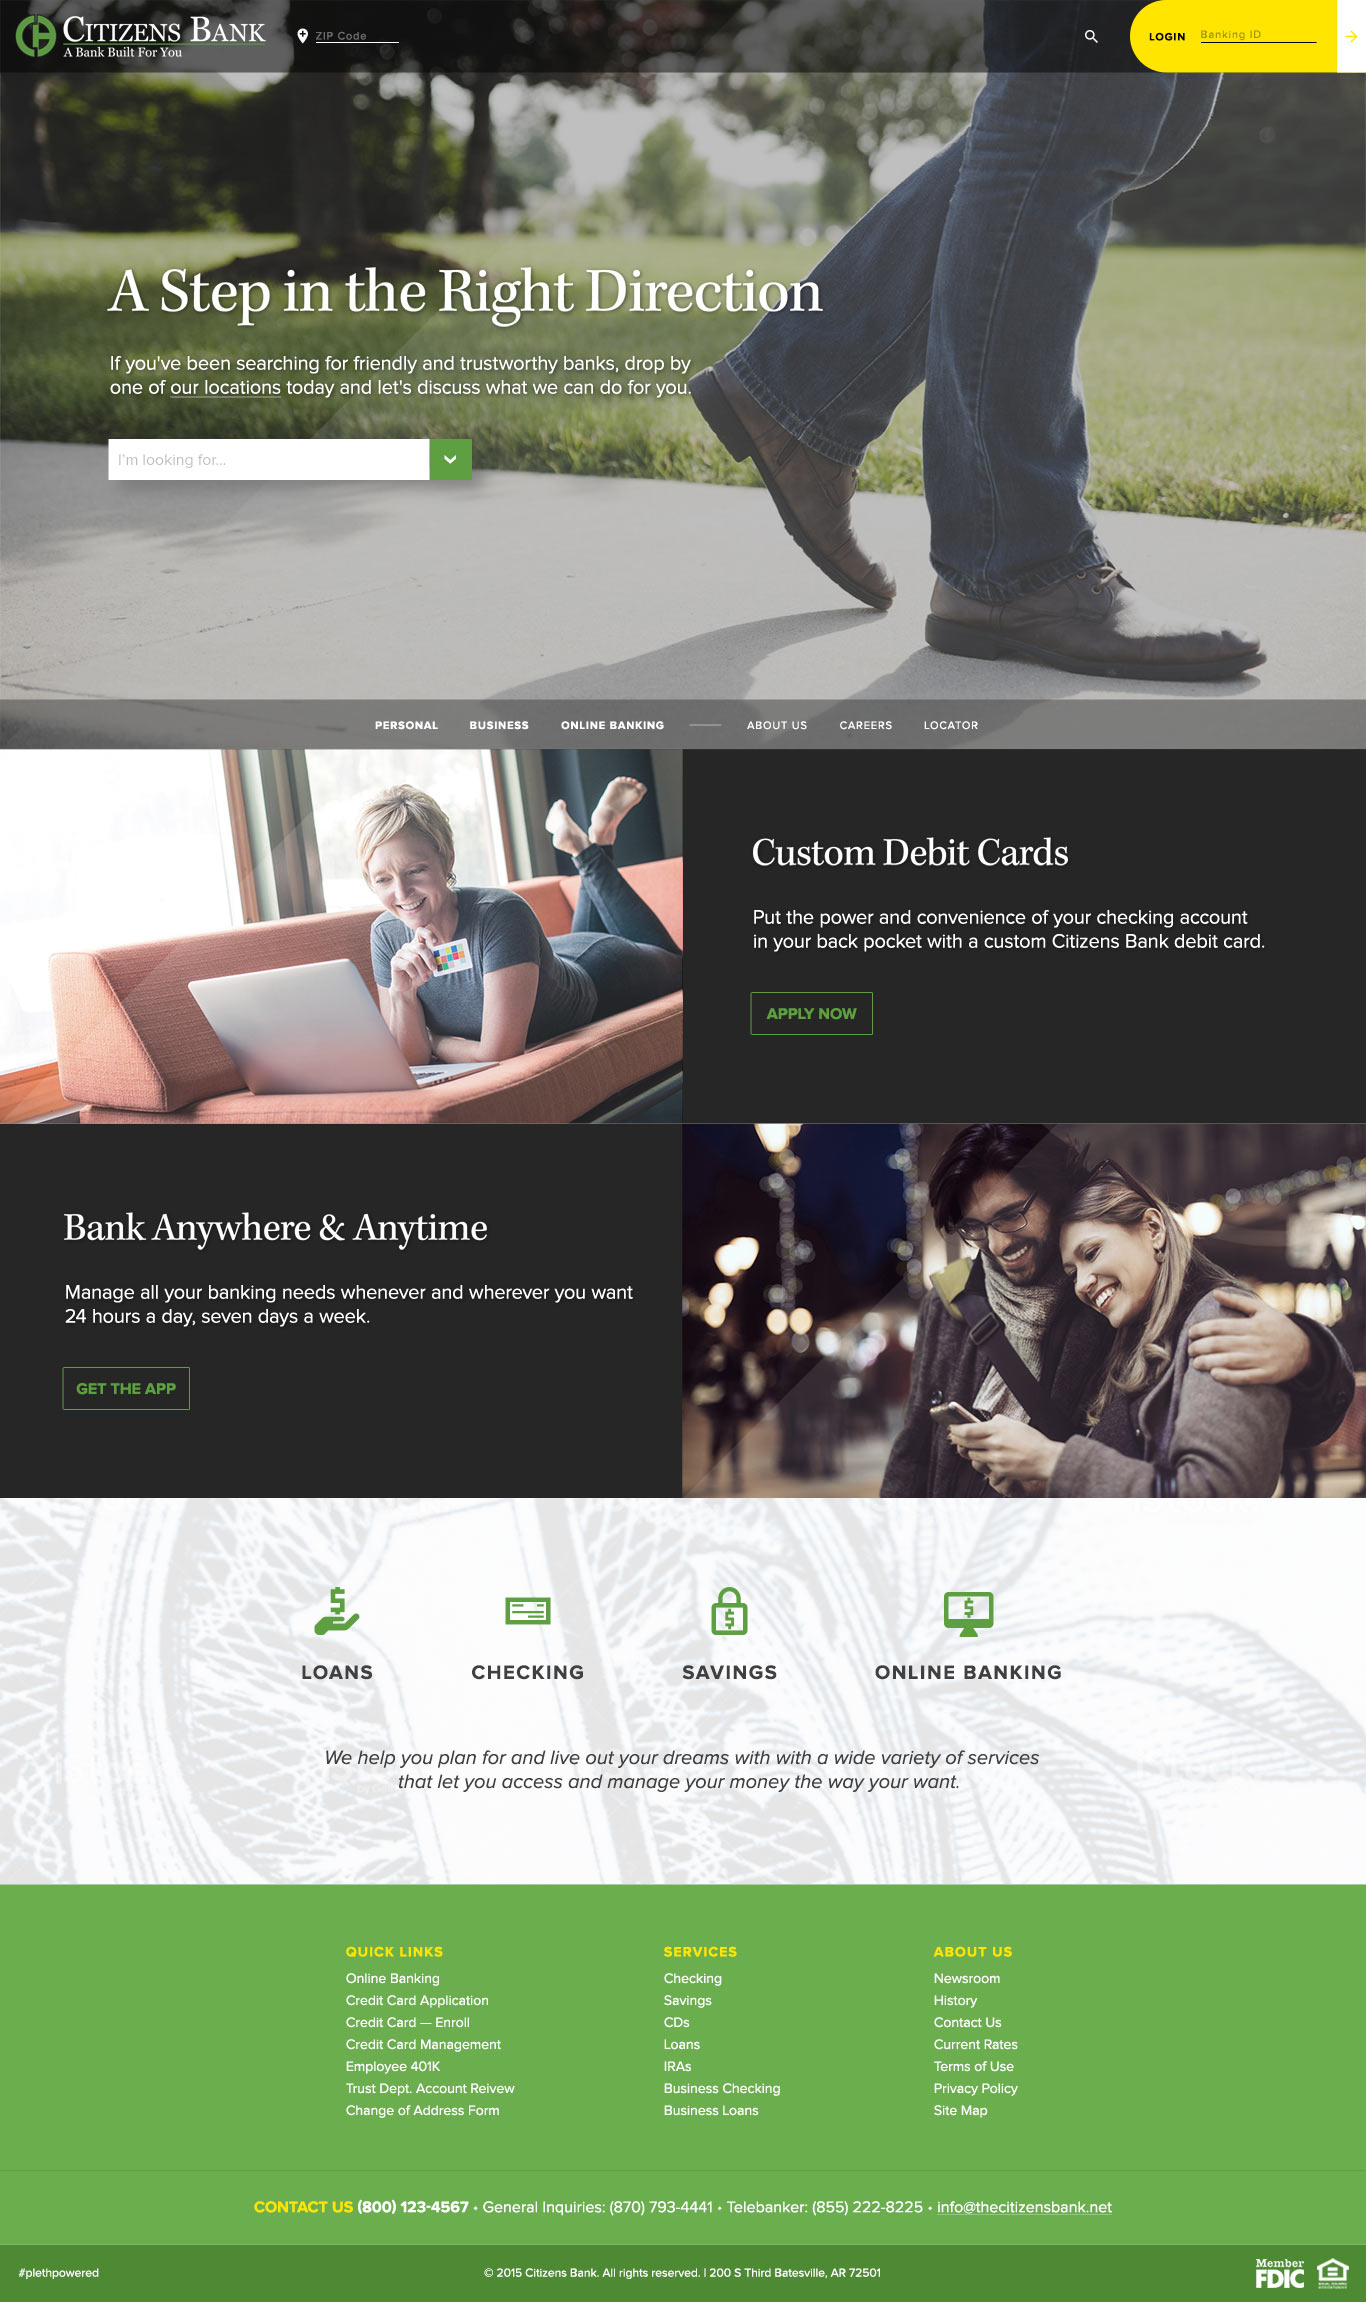 Citizens Bank website, Home page